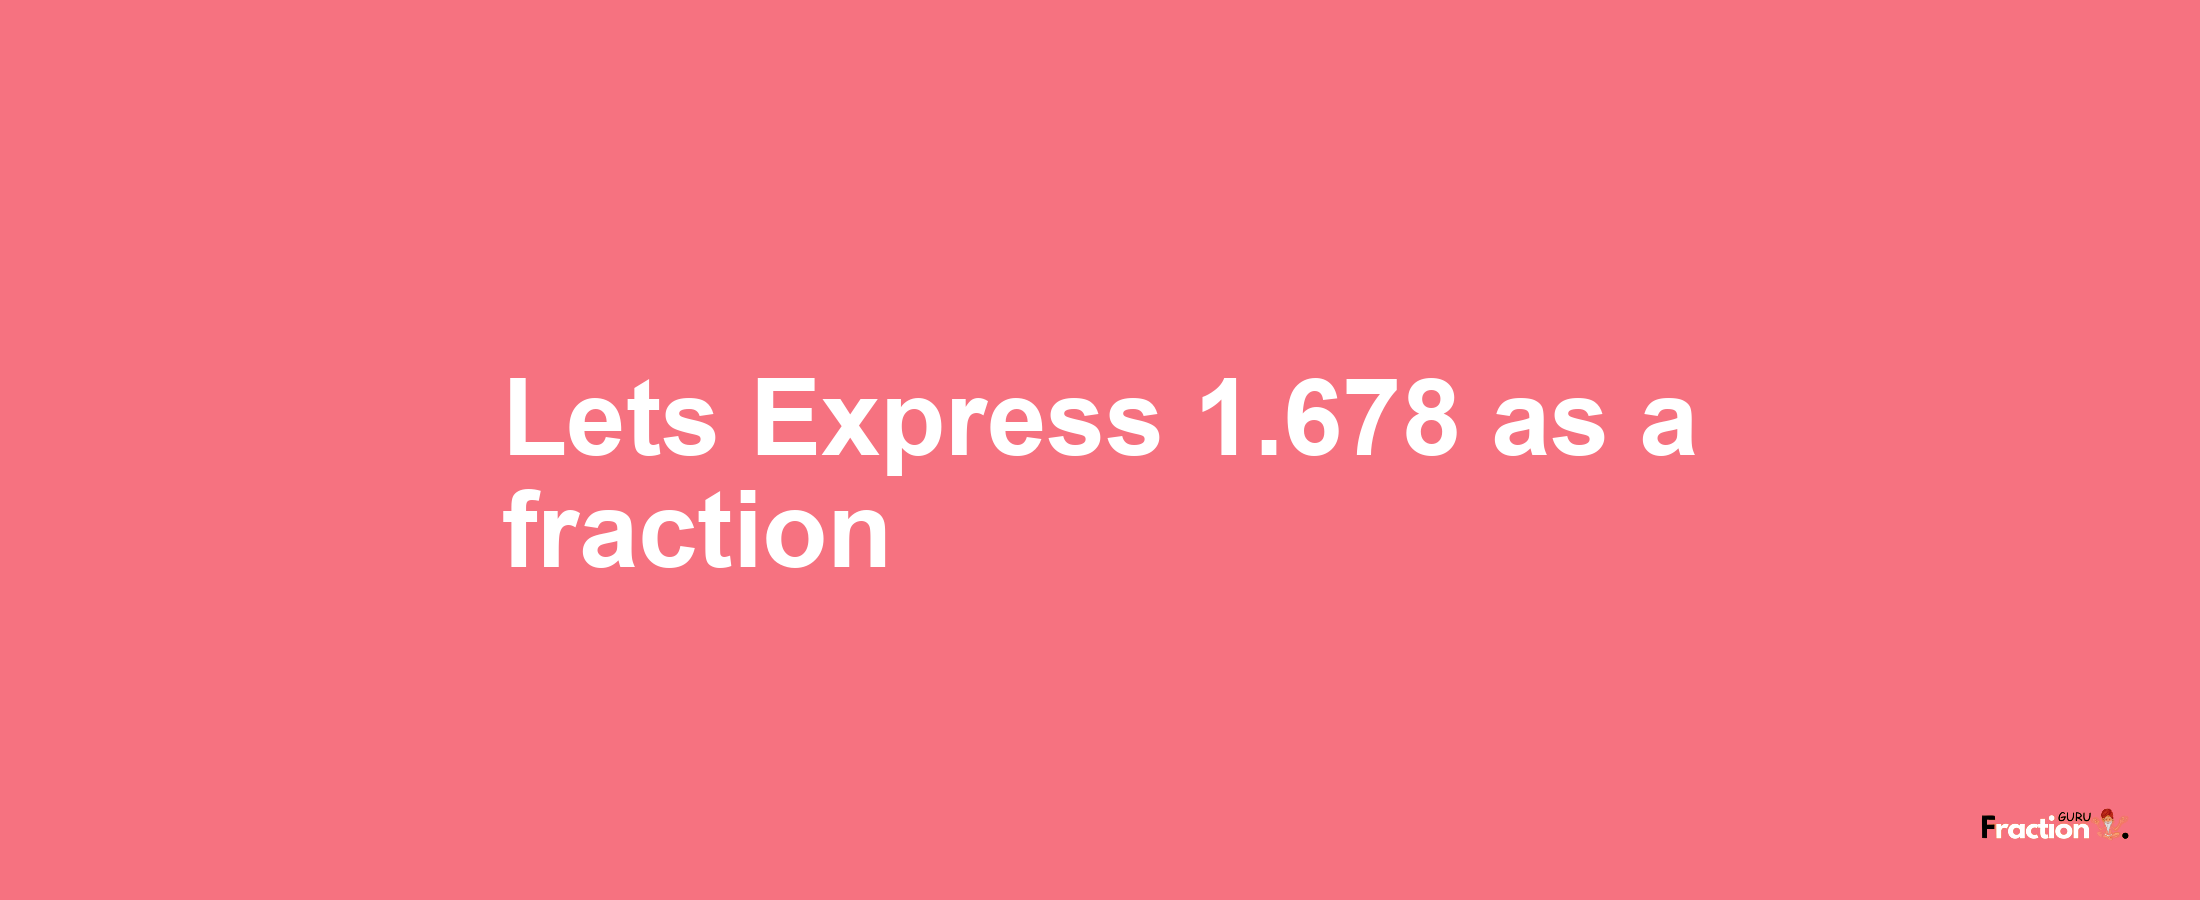 Lets Express 1.678 as afraction